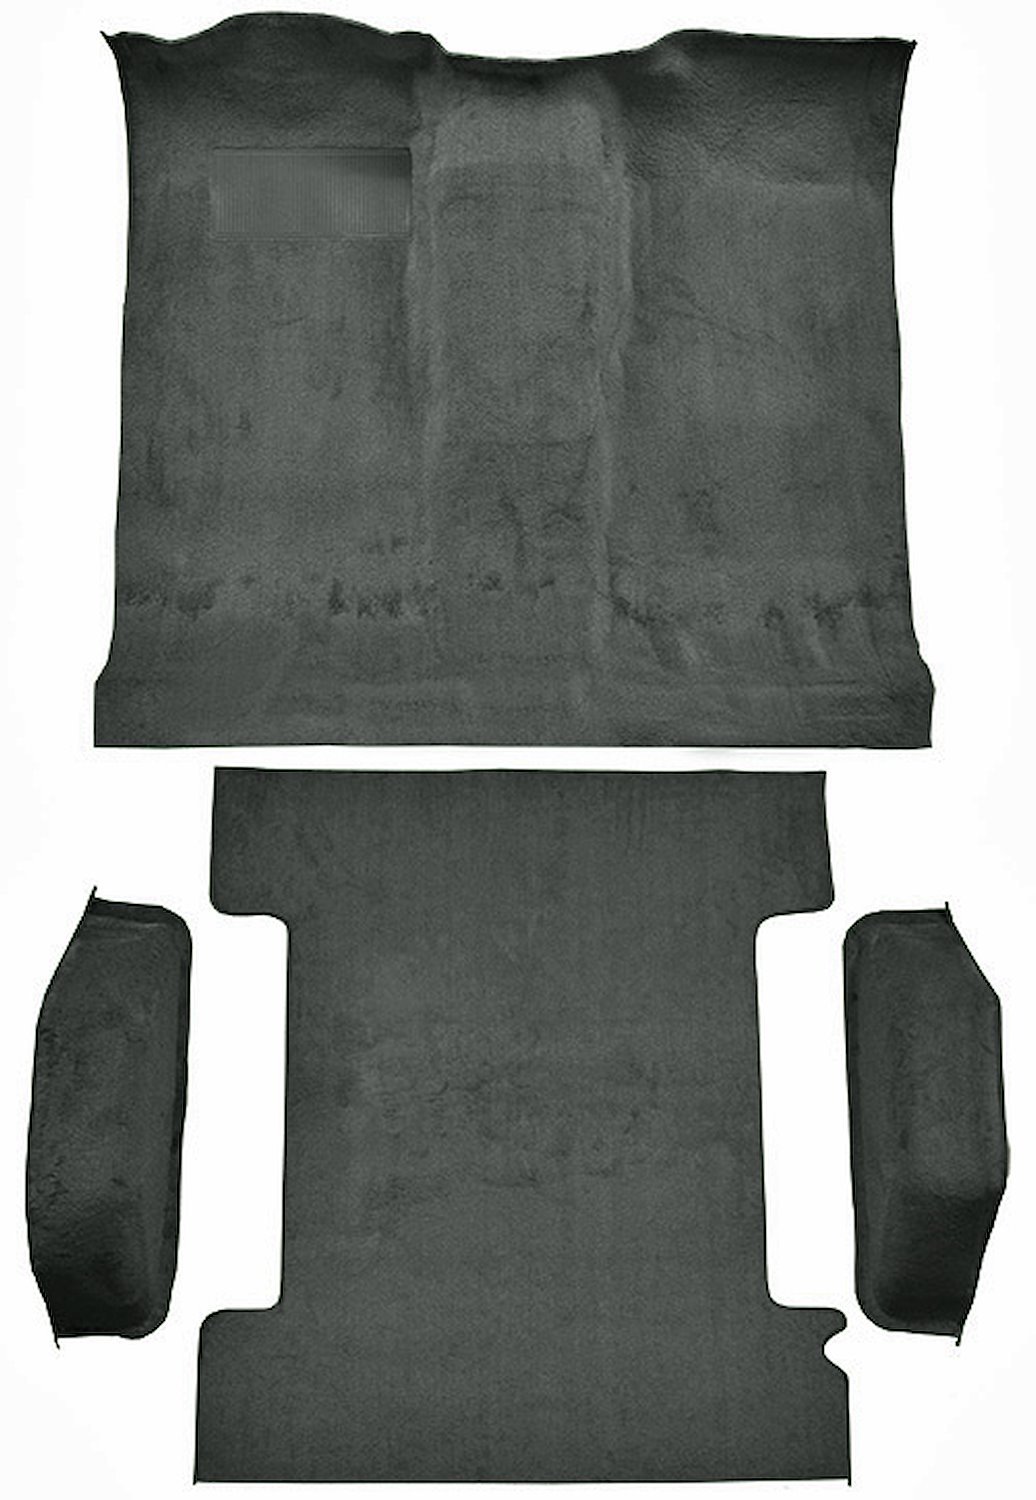 Molded Cut Pile Passenger and Cargo Area Carpet for 1974-1977 Chevy Blazer, GMC Jimmy [Mass Backing, 4-Piece, Dark Gray]